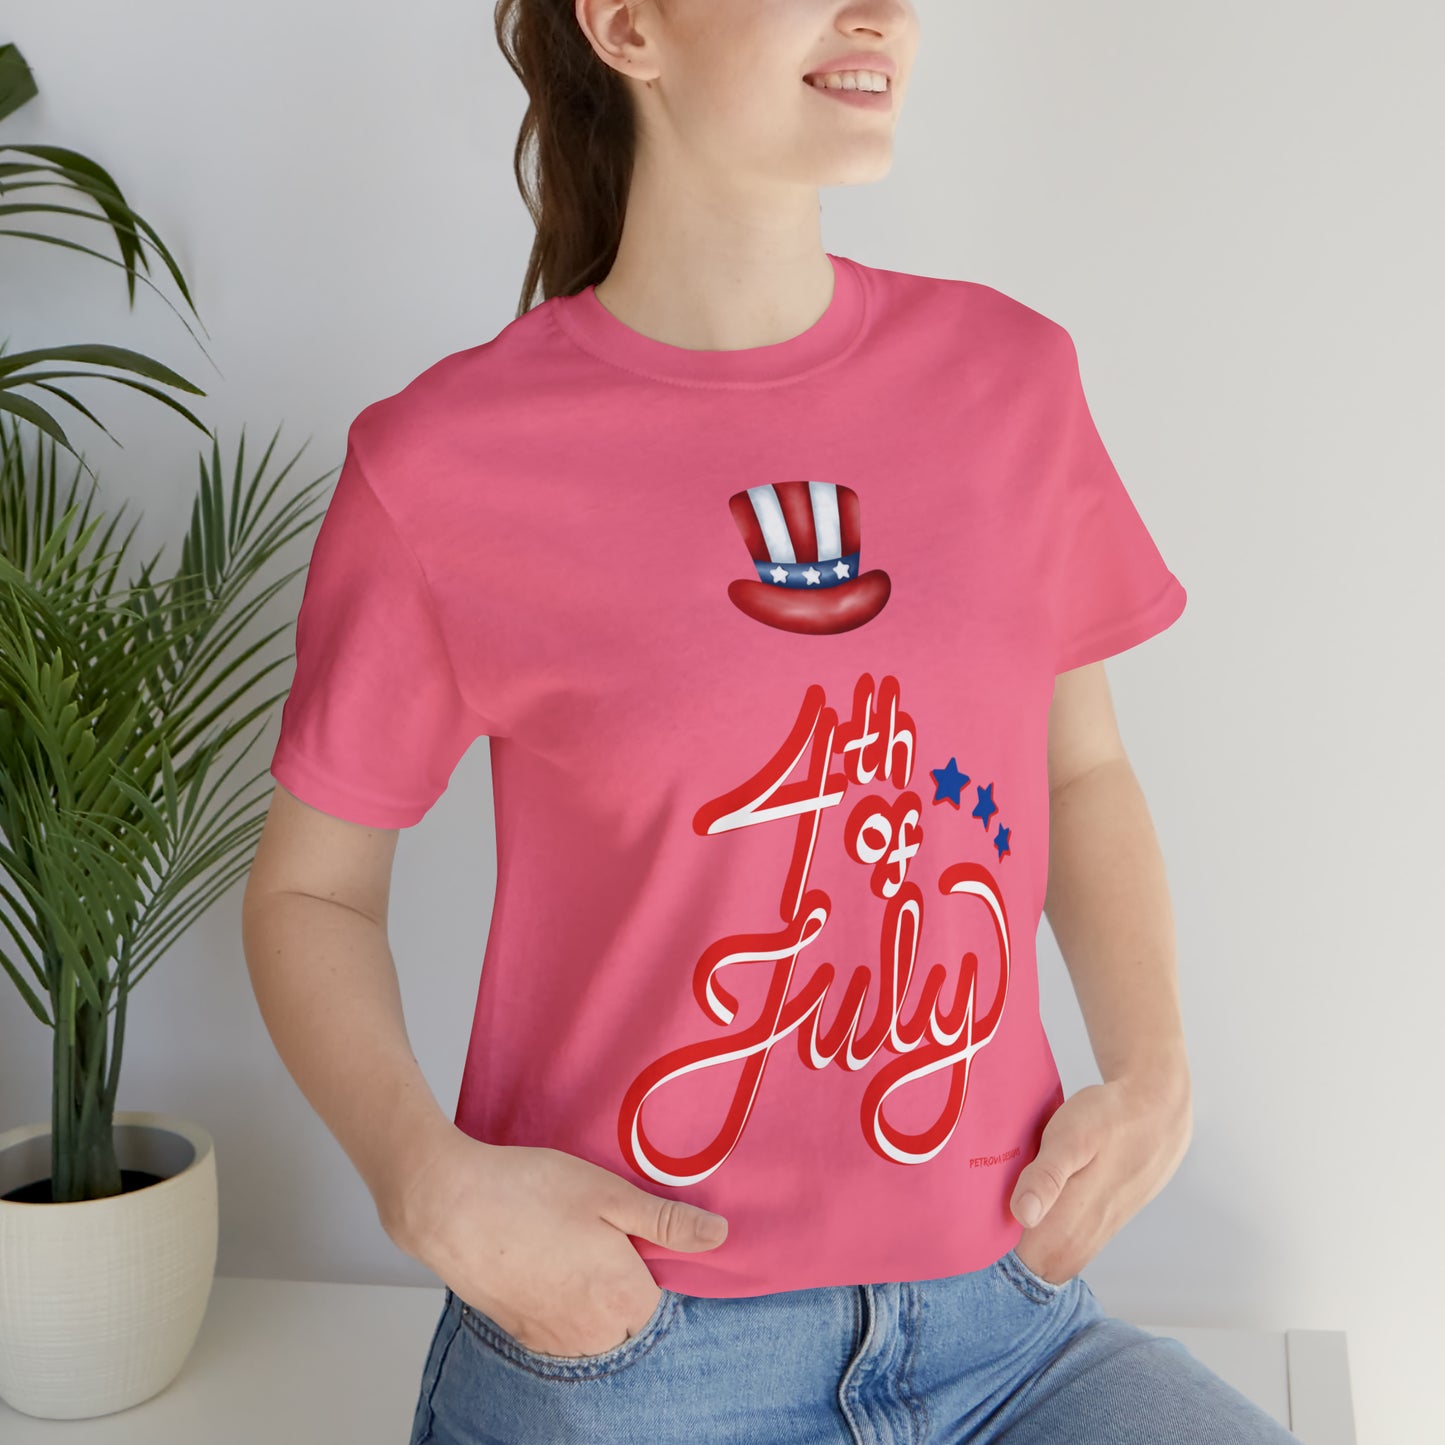 Charity Pink T-Shirt Tshirt Design Gift for Friend and Family Short Sleeved Shirt 4th of July Independence Day Petrova Designs